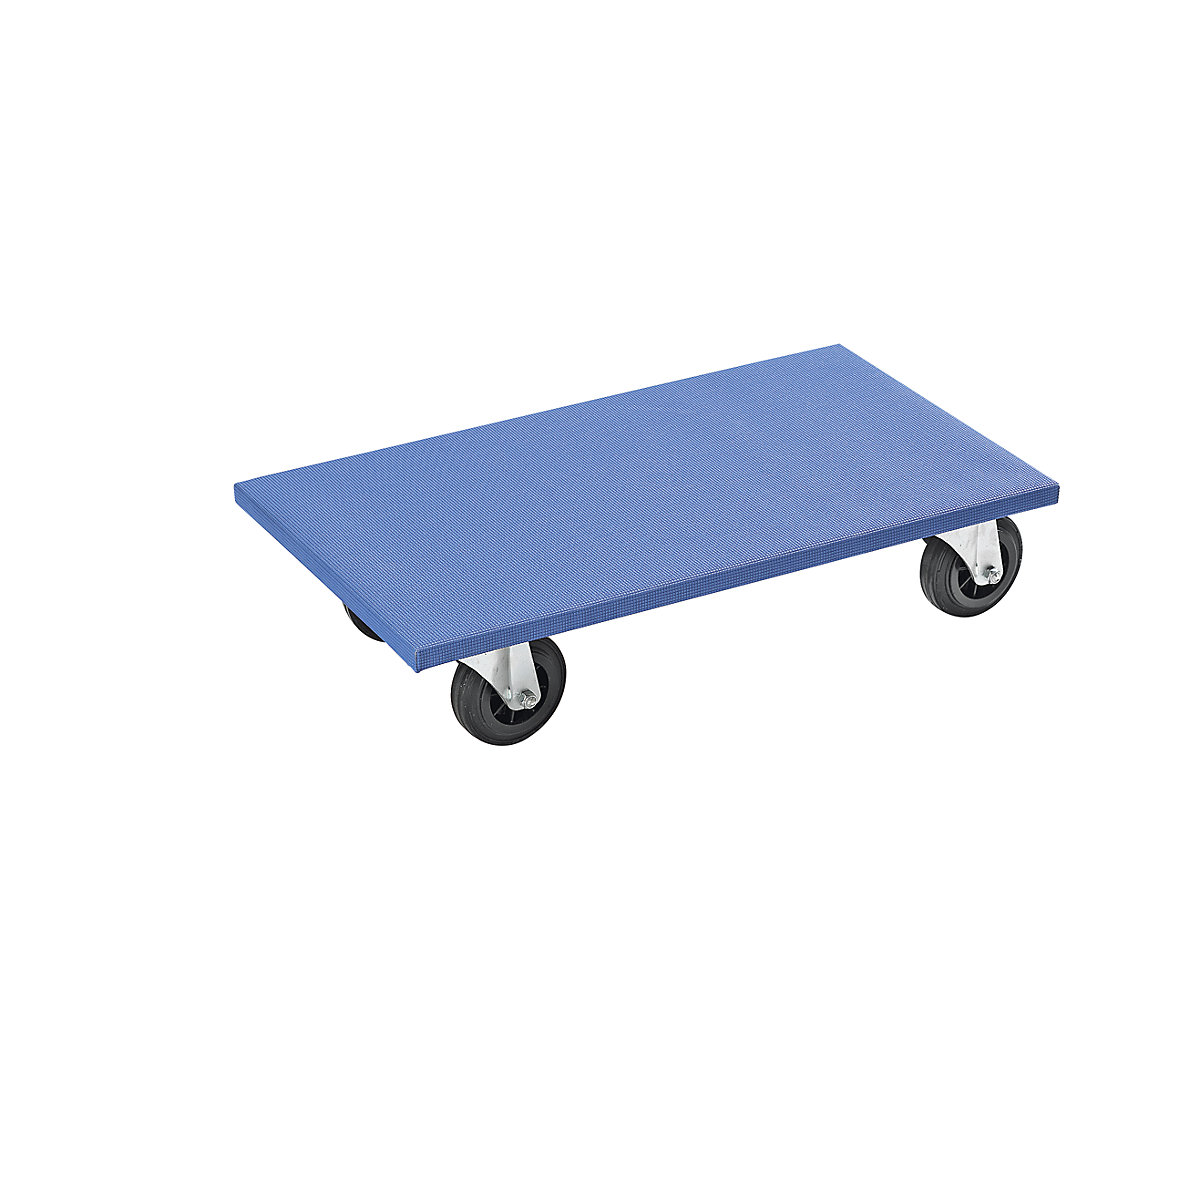 Furniture dolly, LxWxH 600 x 350 x 145 mm, pack of 2, max. load 300 kg, 2+ packs-16